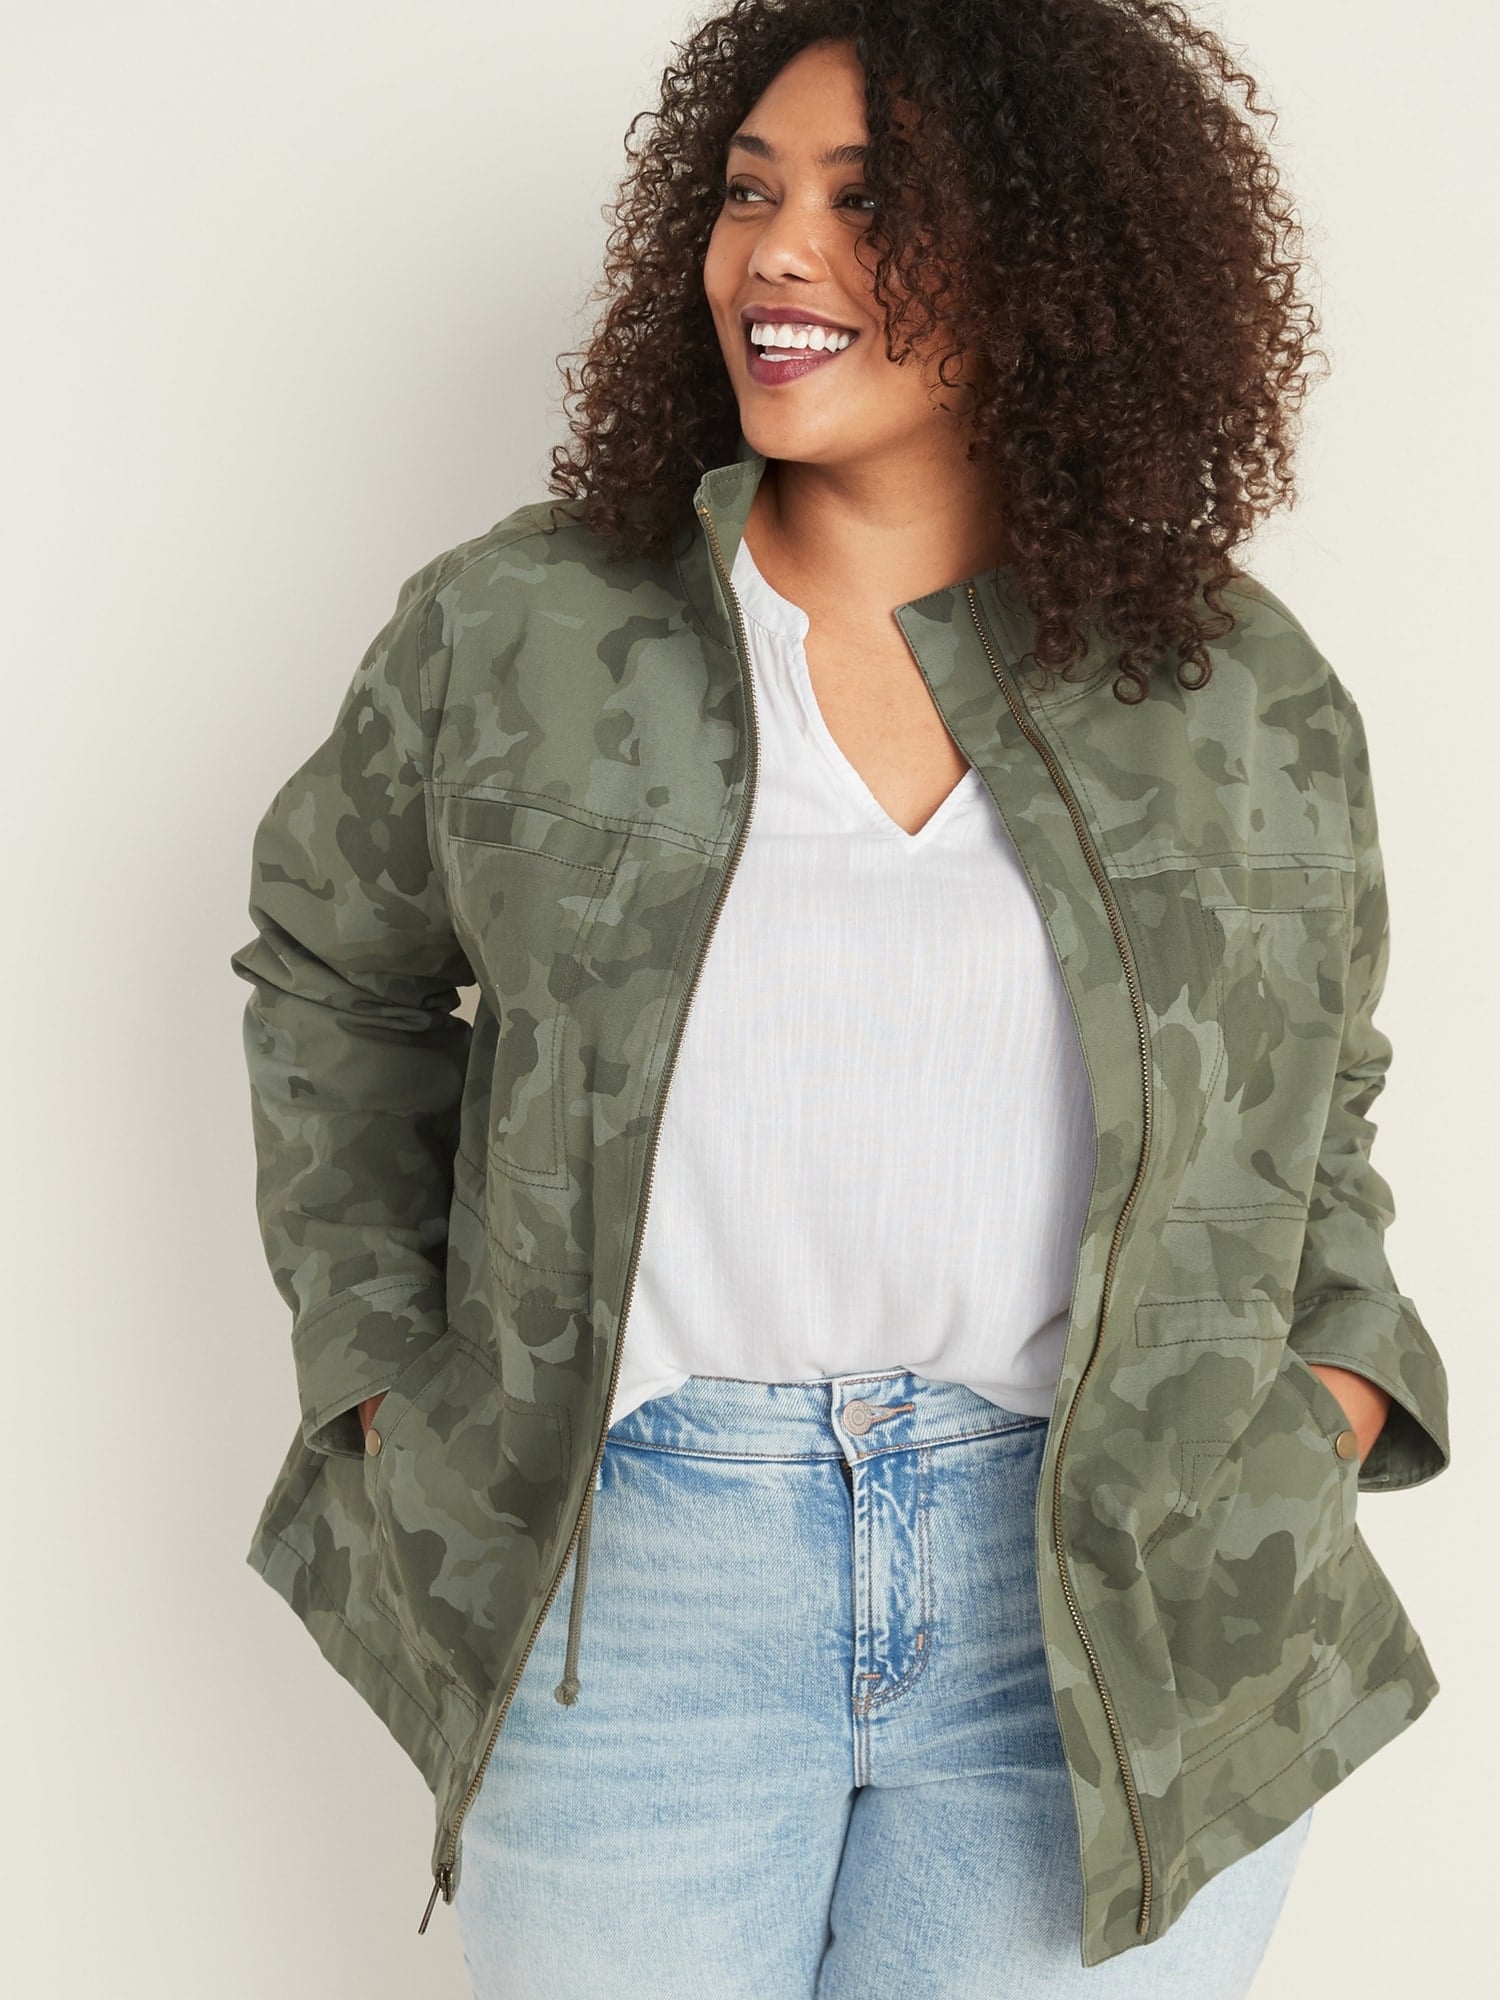 Best Fall Jackets and Coats For Women at Old Navy | POPSUGAR Fashion UK